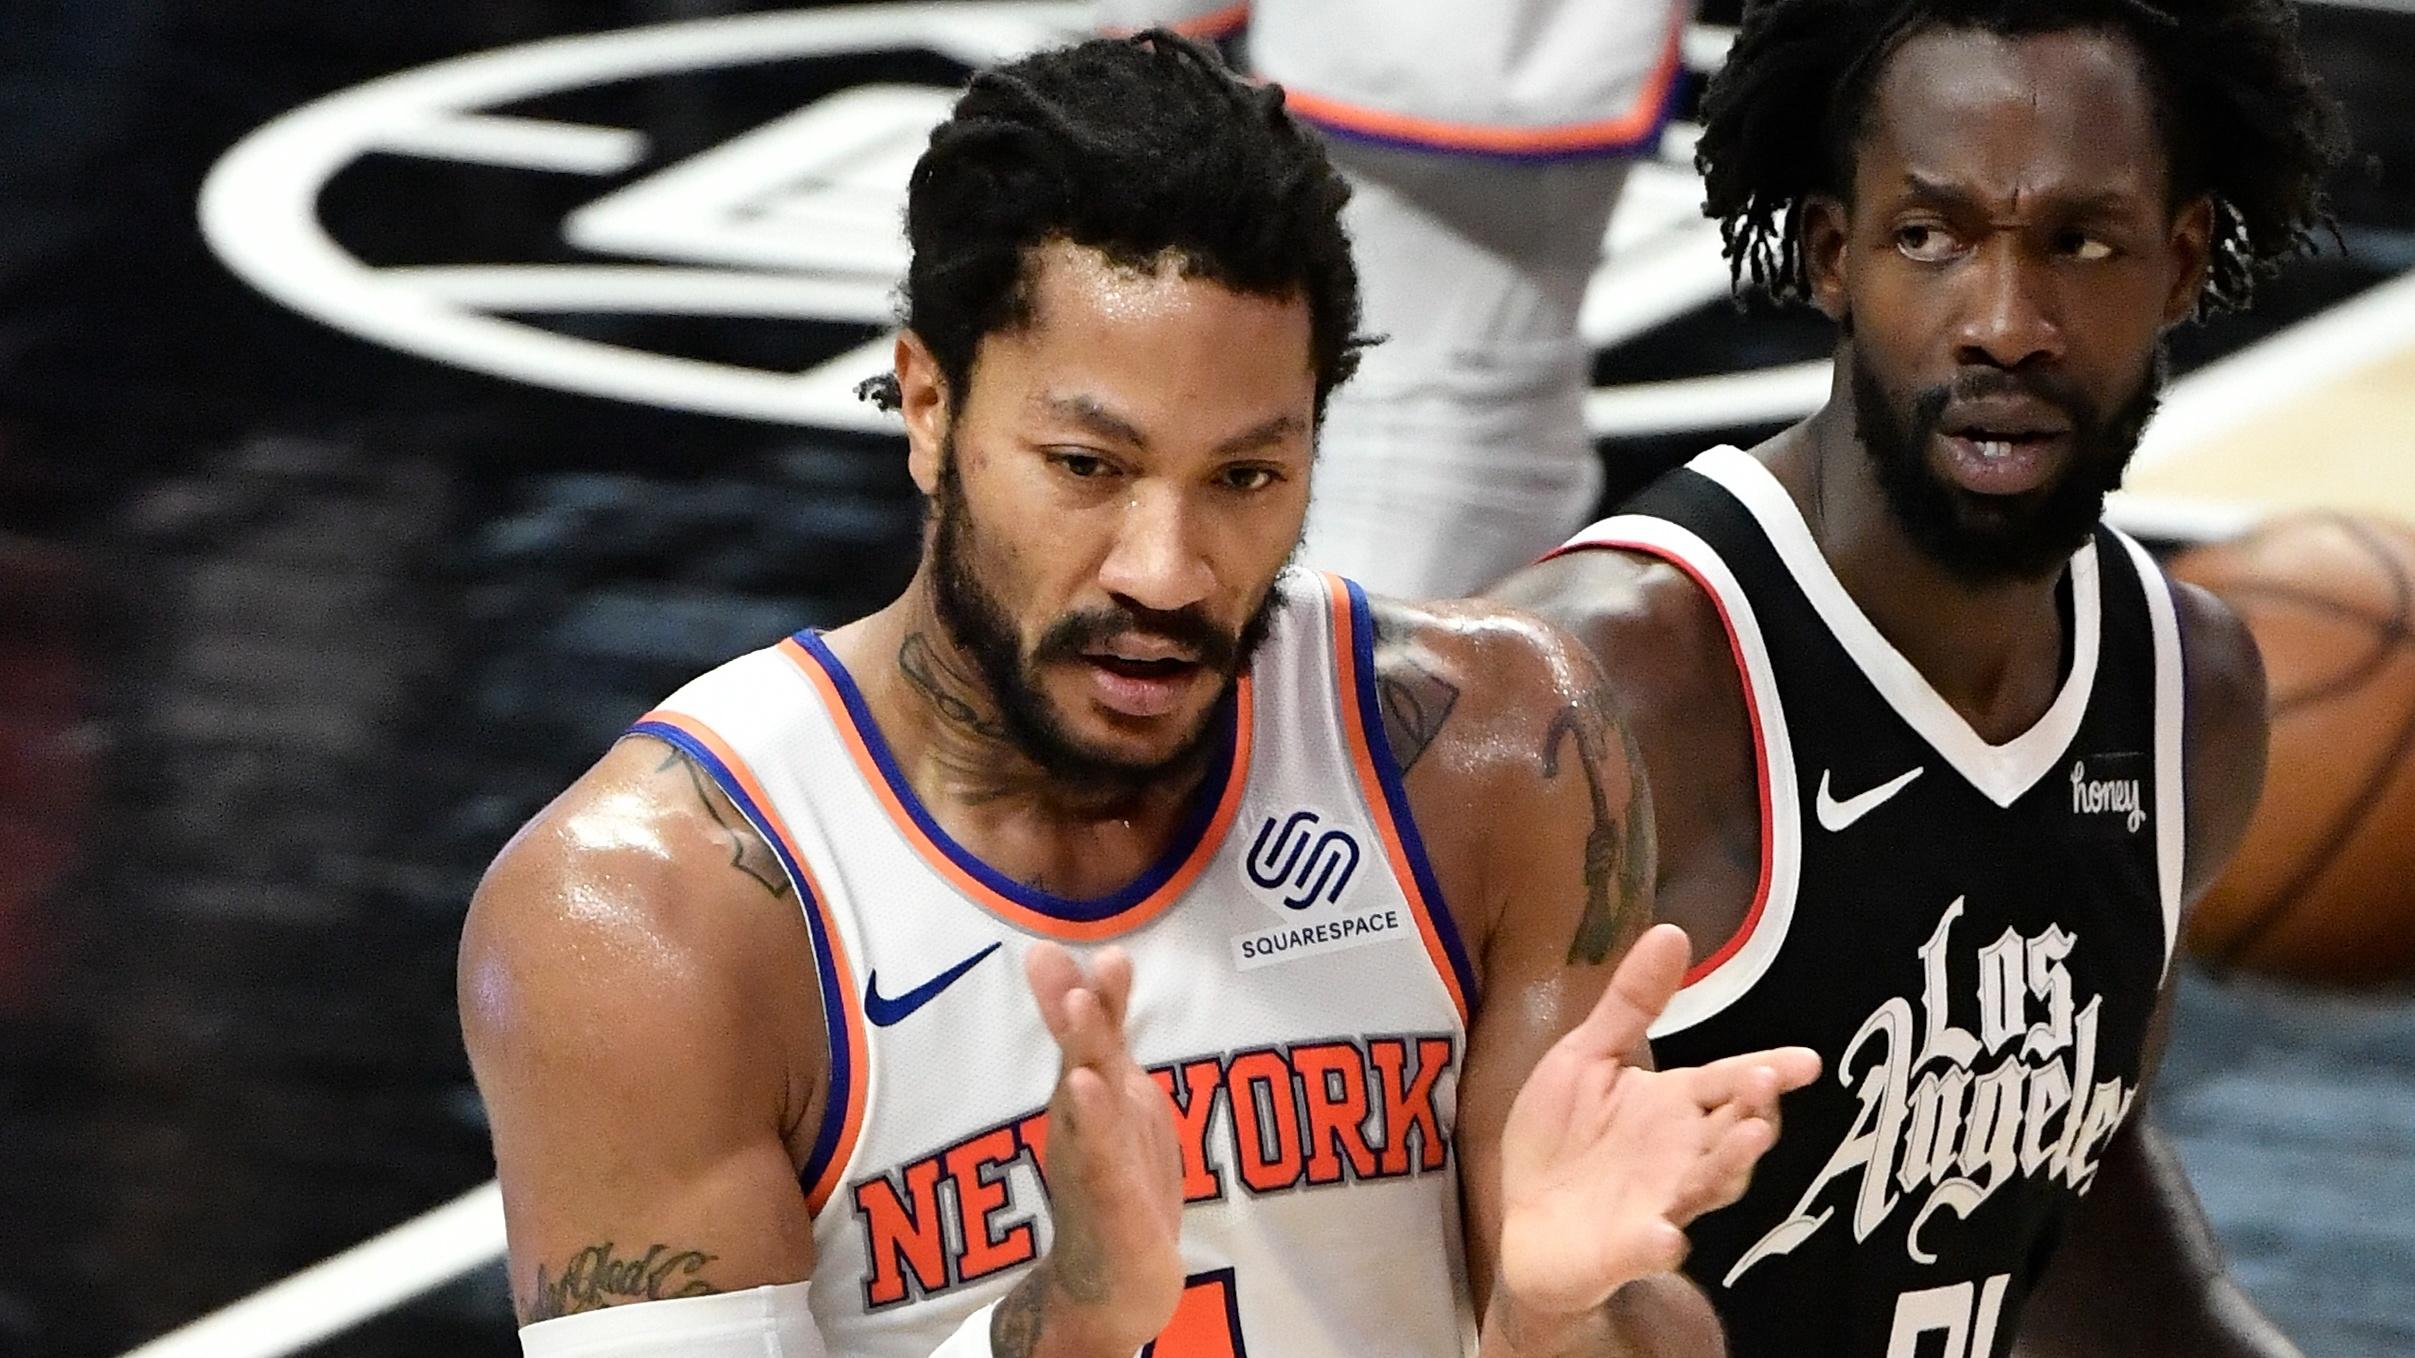 May 9, 2021; Los Angeles, California, USA; New York Knicks guard Derrick Rose (4) reacts to a referee's call going his way during the section quarter as LA Clippers guard Patrick Beverley (21) looks on at Staples Center. / © Robert Hanashiro-USA TODAY Sports